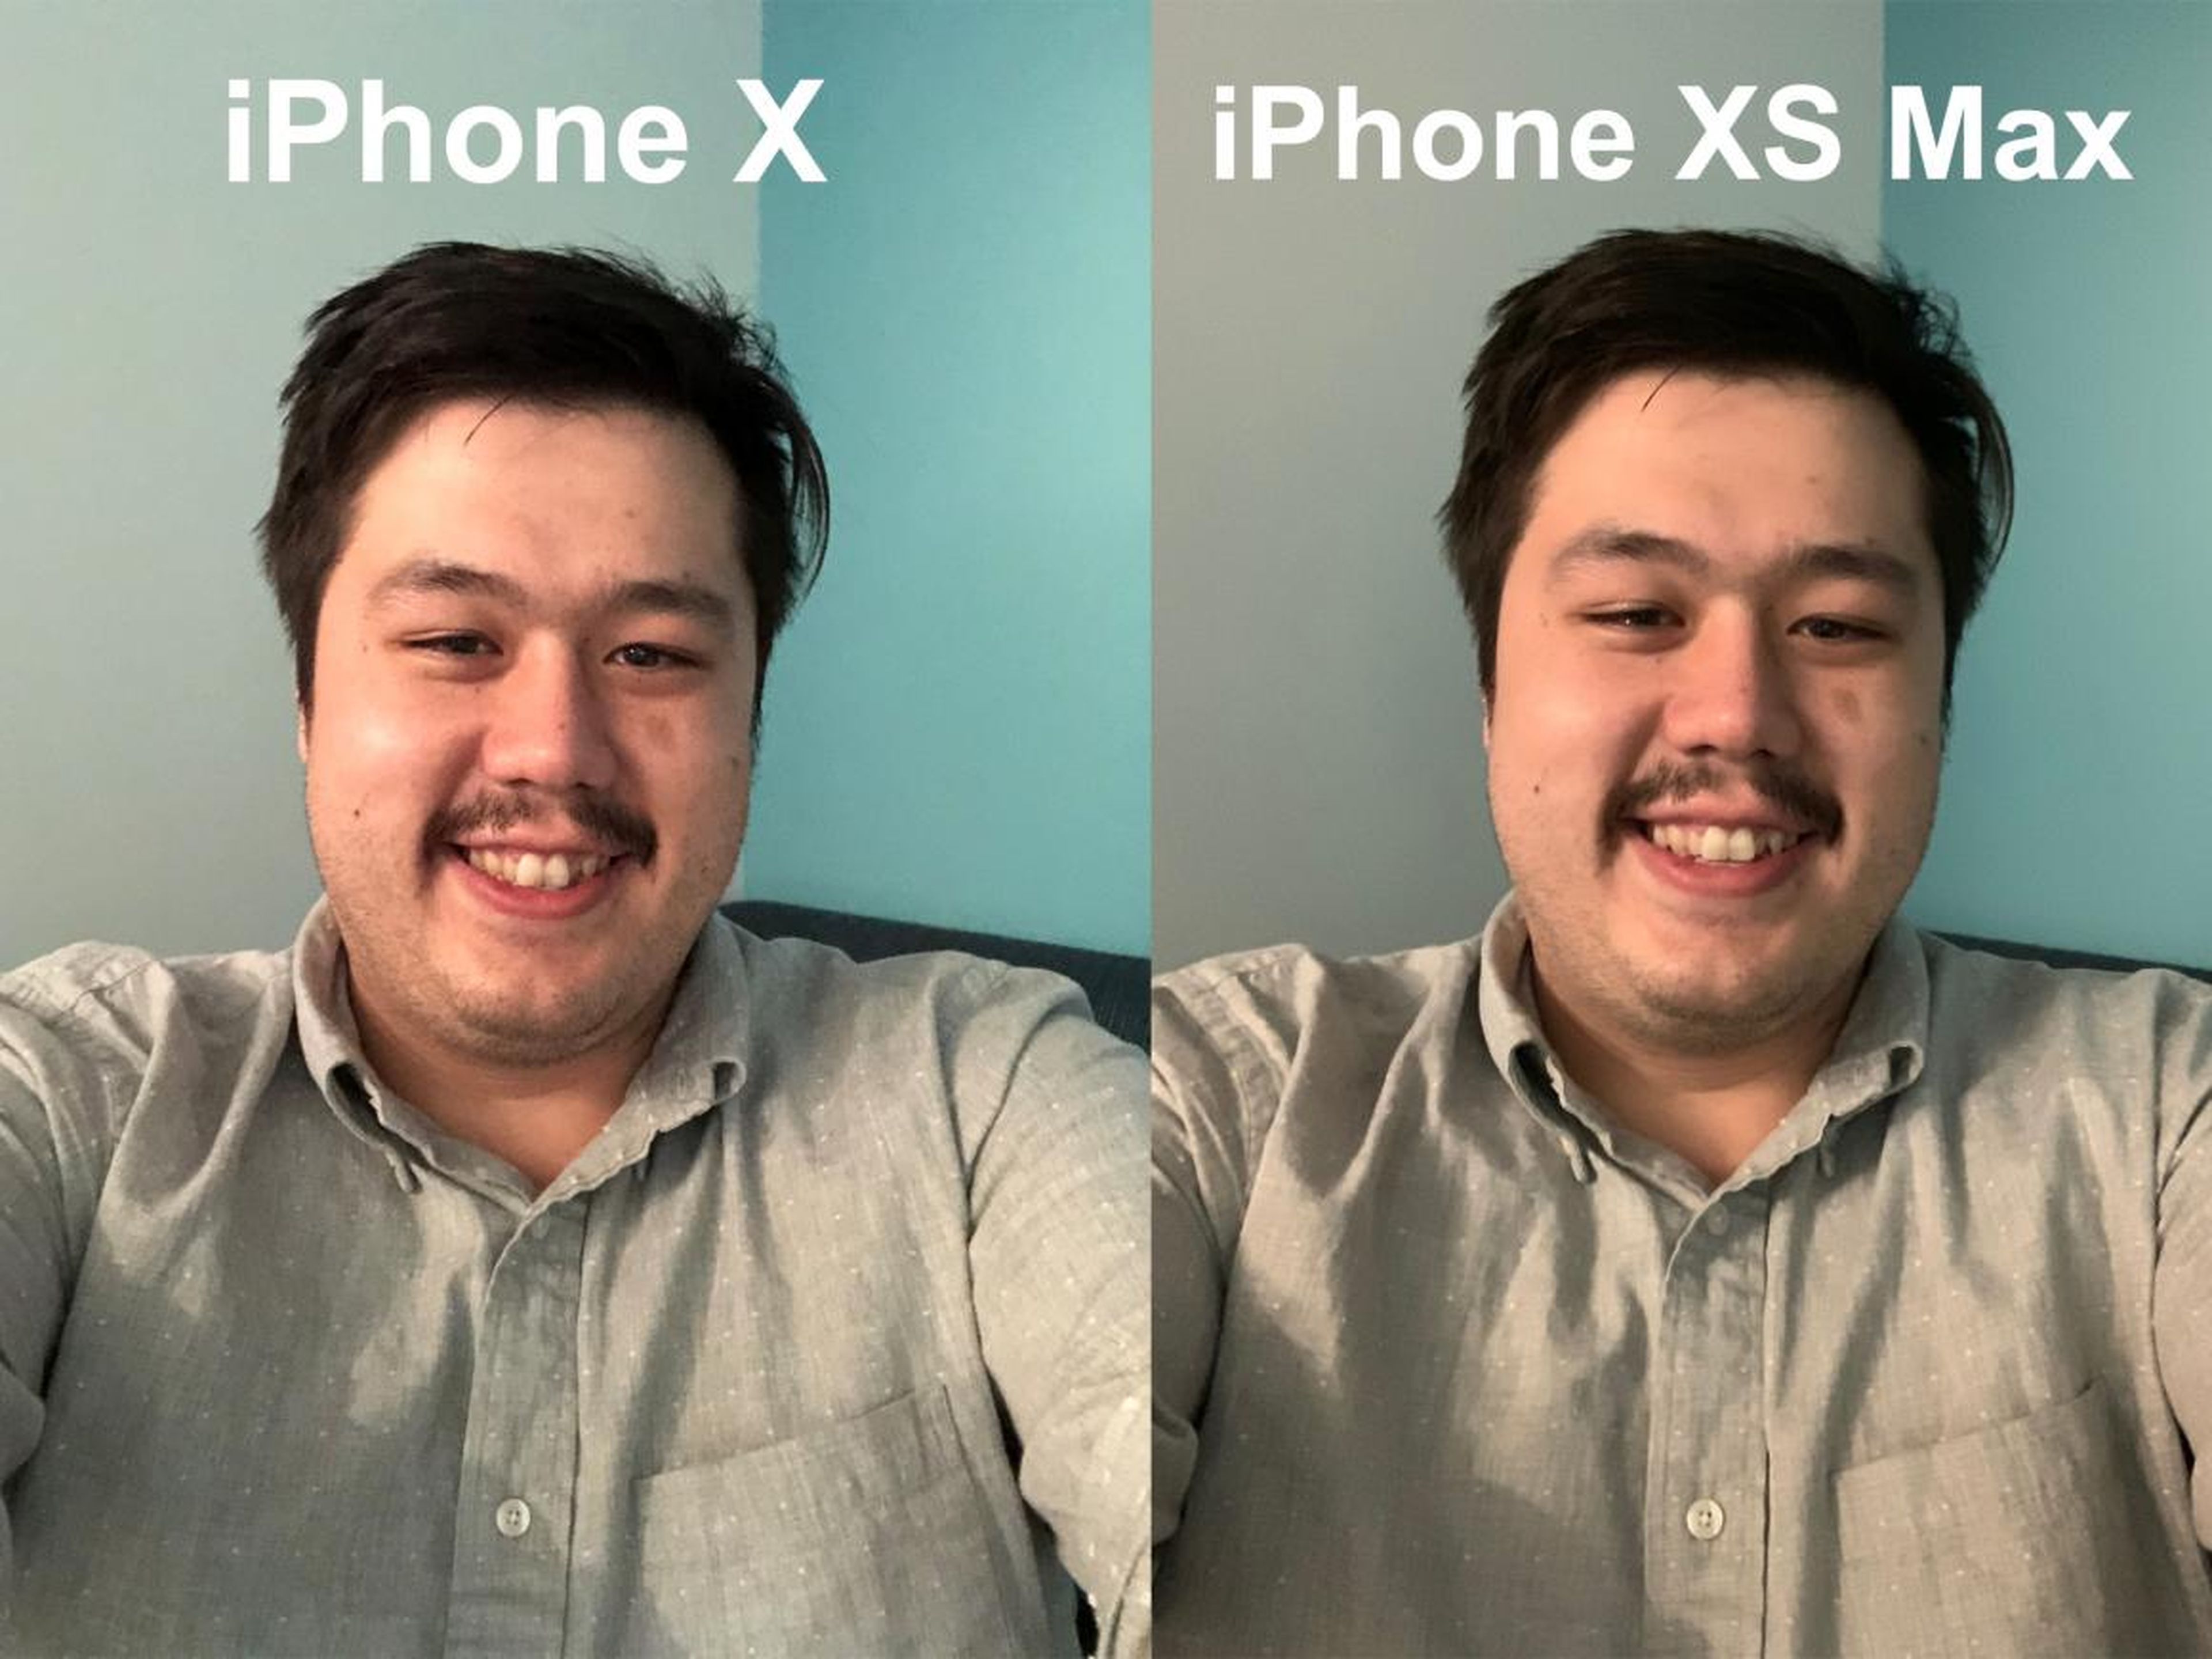 The same goes for Kif's low-light selfies with the iPhone XS Max, where his face is smoothed out considerably compared to the iPhone X selfie. Face sheen is reduced and colors are more uniform in the iPhone XS selfie.